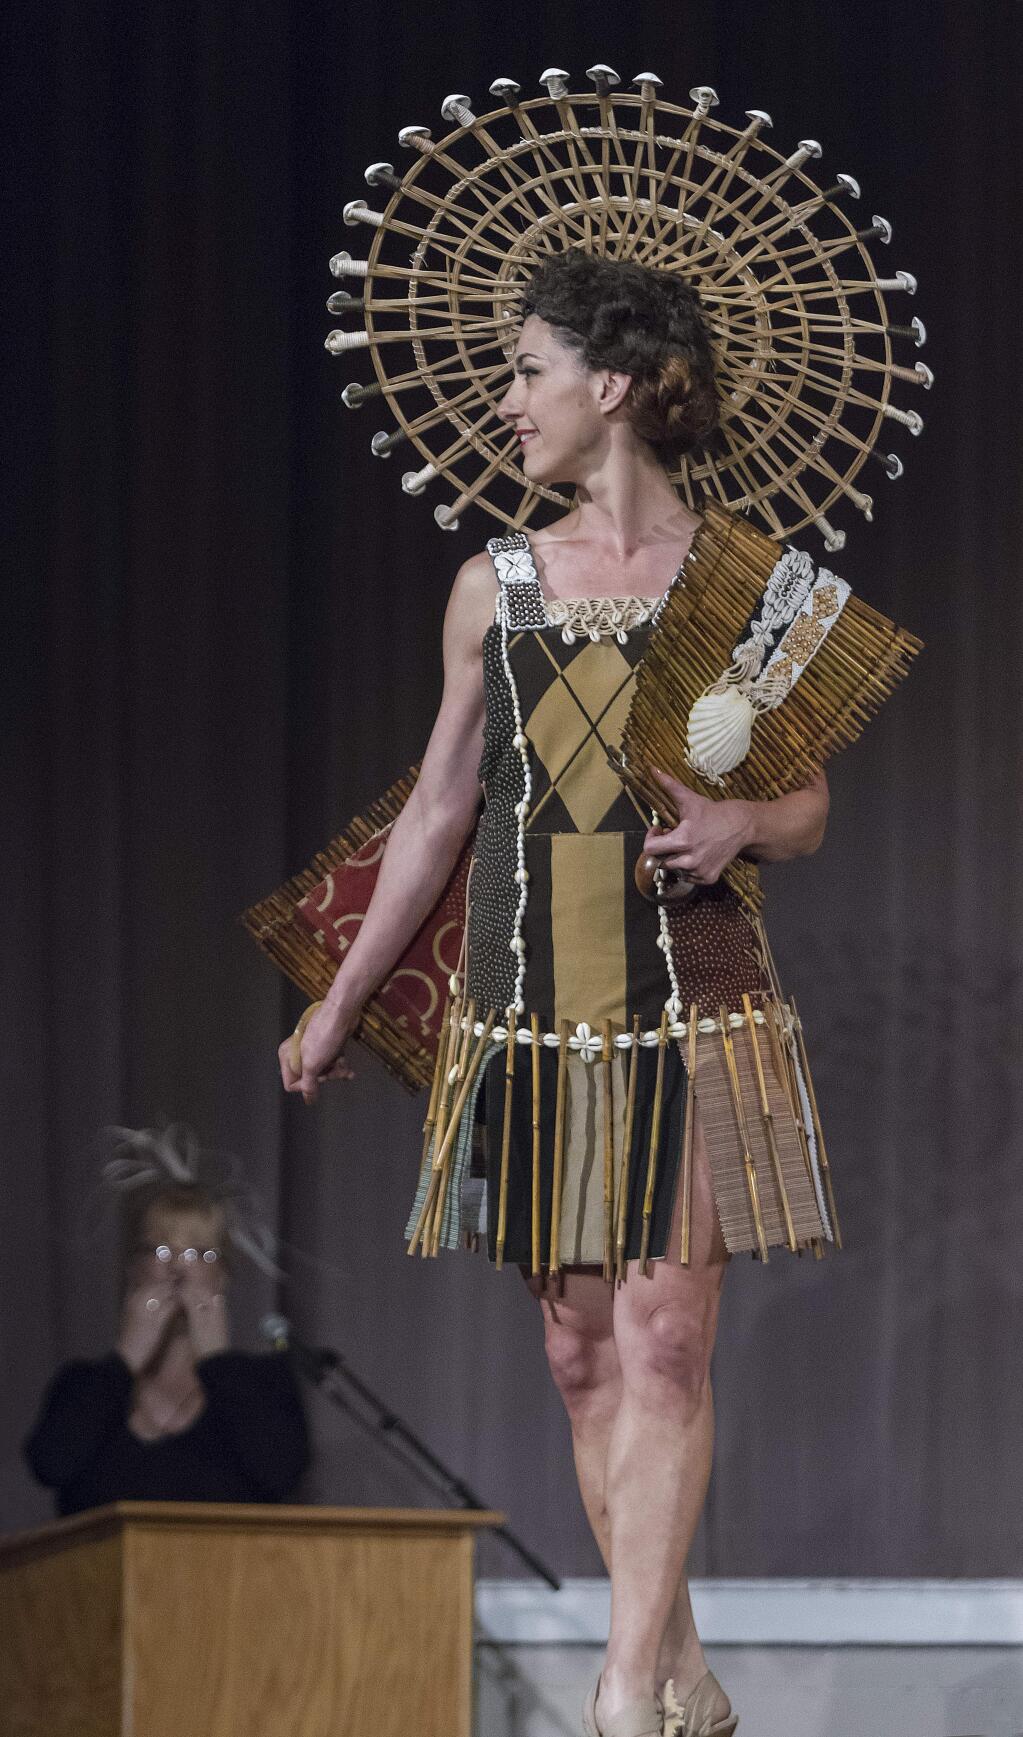 One of the looks from the Sonoma Community Center's Trashion Fashion Show in 2015. (Photos by Robbi Pengelly/Index-Tribune)